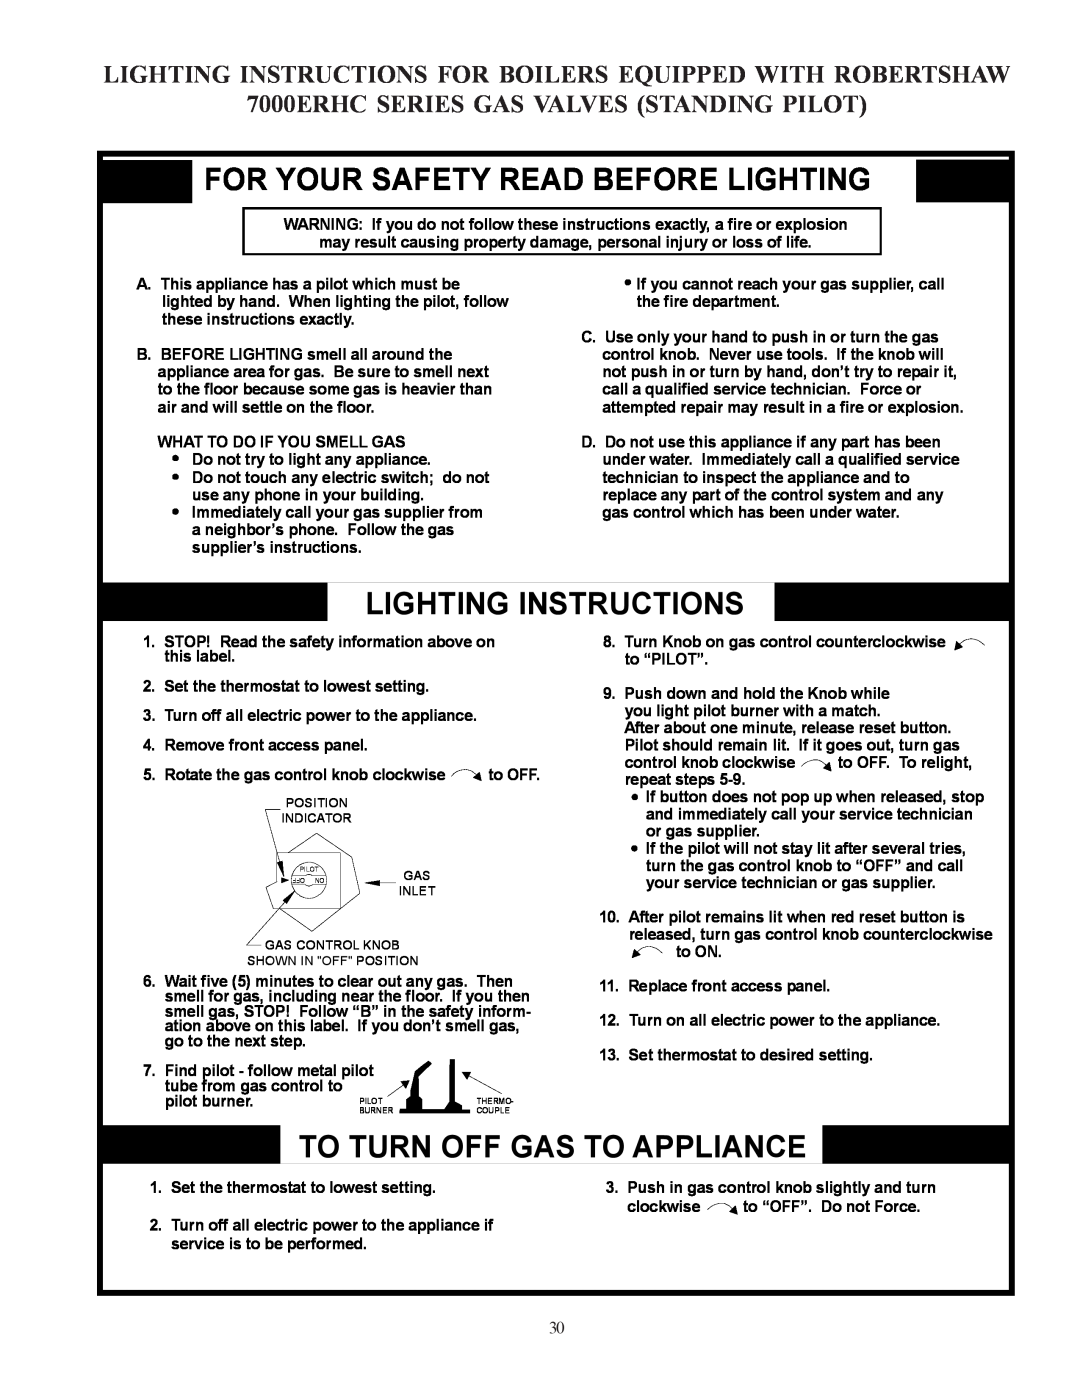 Crown Boiler CWI207 For Your Safety Read Before Lighting, Lighting Instructions For Boilers Equipped With Robertshaw 